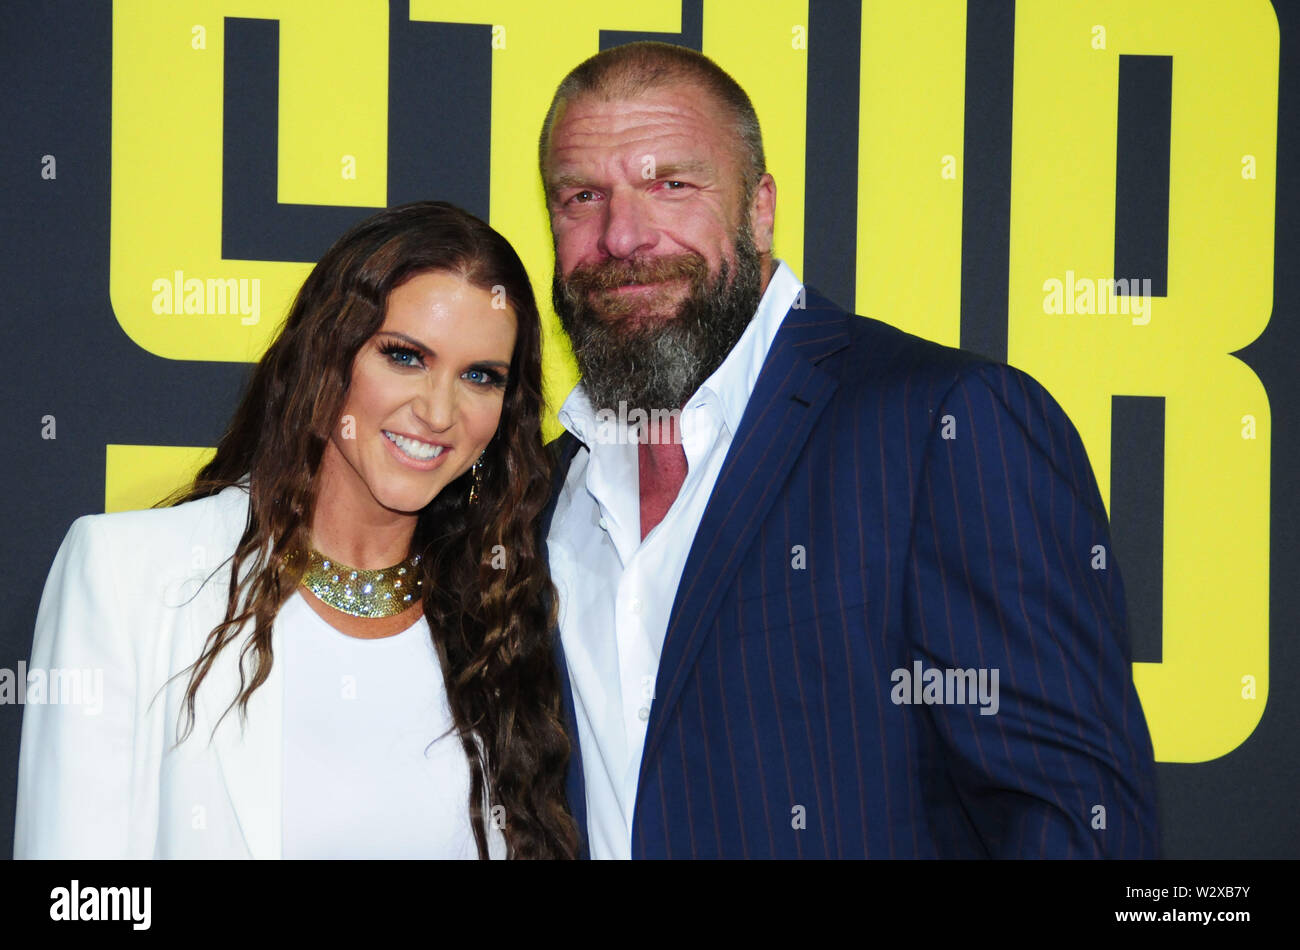 Los Angeles, California, USA 10th July 2019 Chief Brand Officer of WWE Stephanie McMahaon and husband wrestler/actor Triple H, aka Paul Michael Levesque attend 20th Century Fox's 'Stuber' Premiere on July 10, 2019 at Regal Cinemas L.A. Live in Los Angeles, California, USA. Photo by Barry King/Alamy Live News Stock Photo